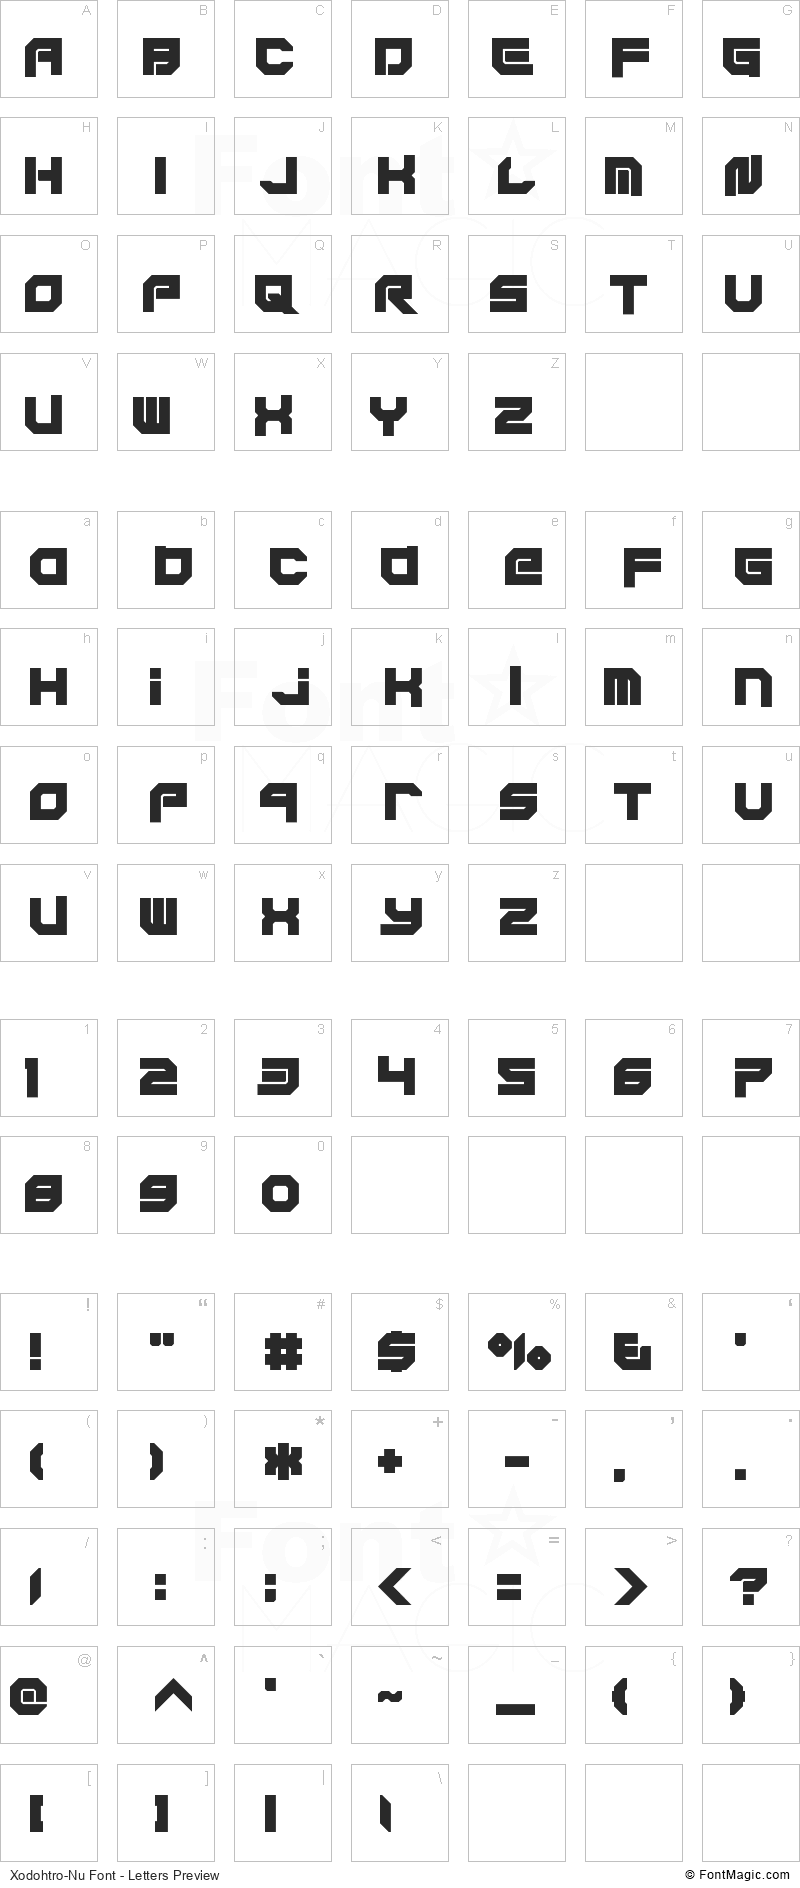 Xodohtro-Nu Font - All Latters Preview Chart